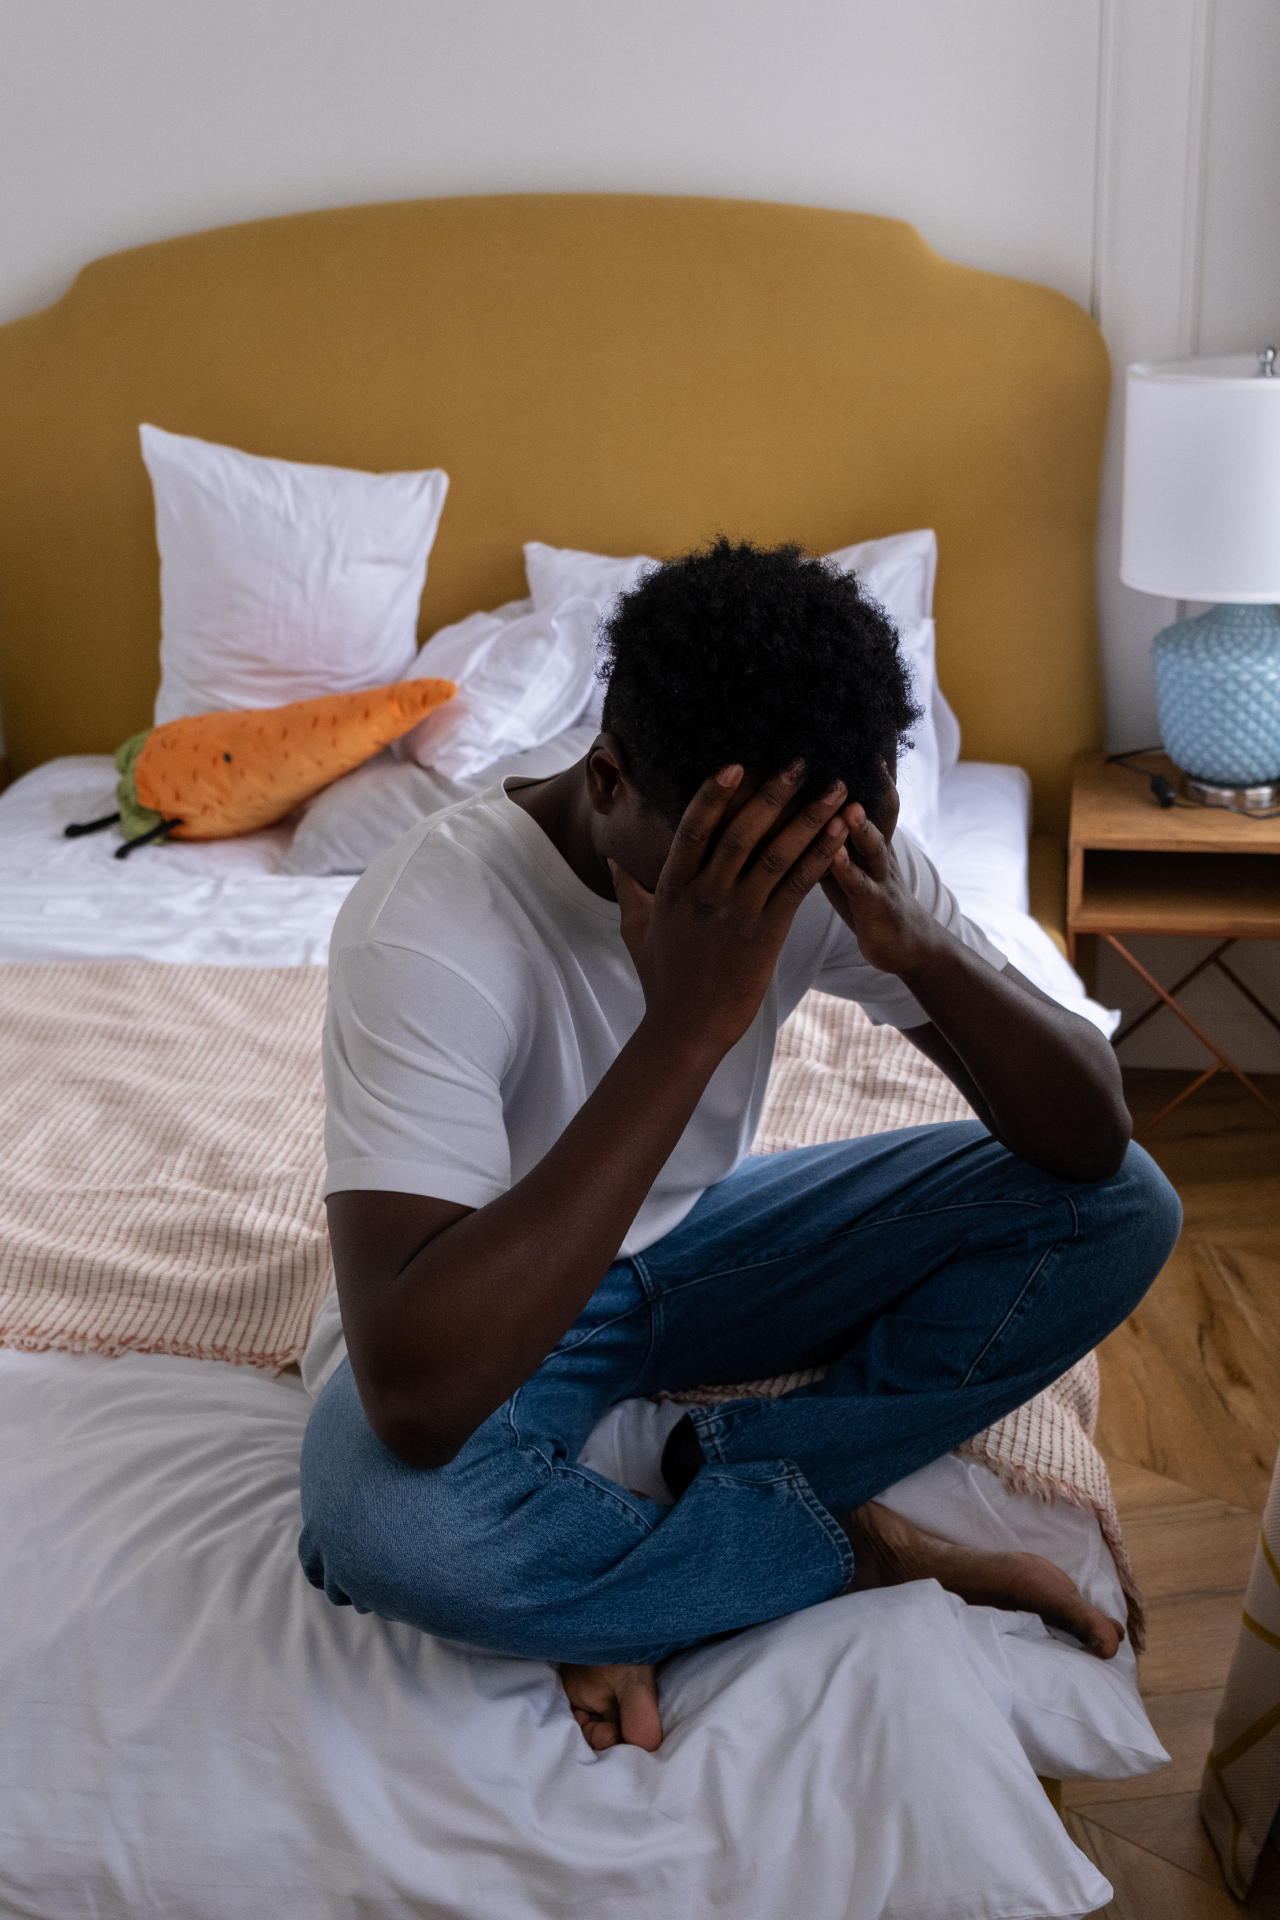 Image of an upset man sitting on the end of a bed covering his face. Learn how you can effectively cope with your depression symptoms with the help of depression therapy in Saint Petersburg, FL.